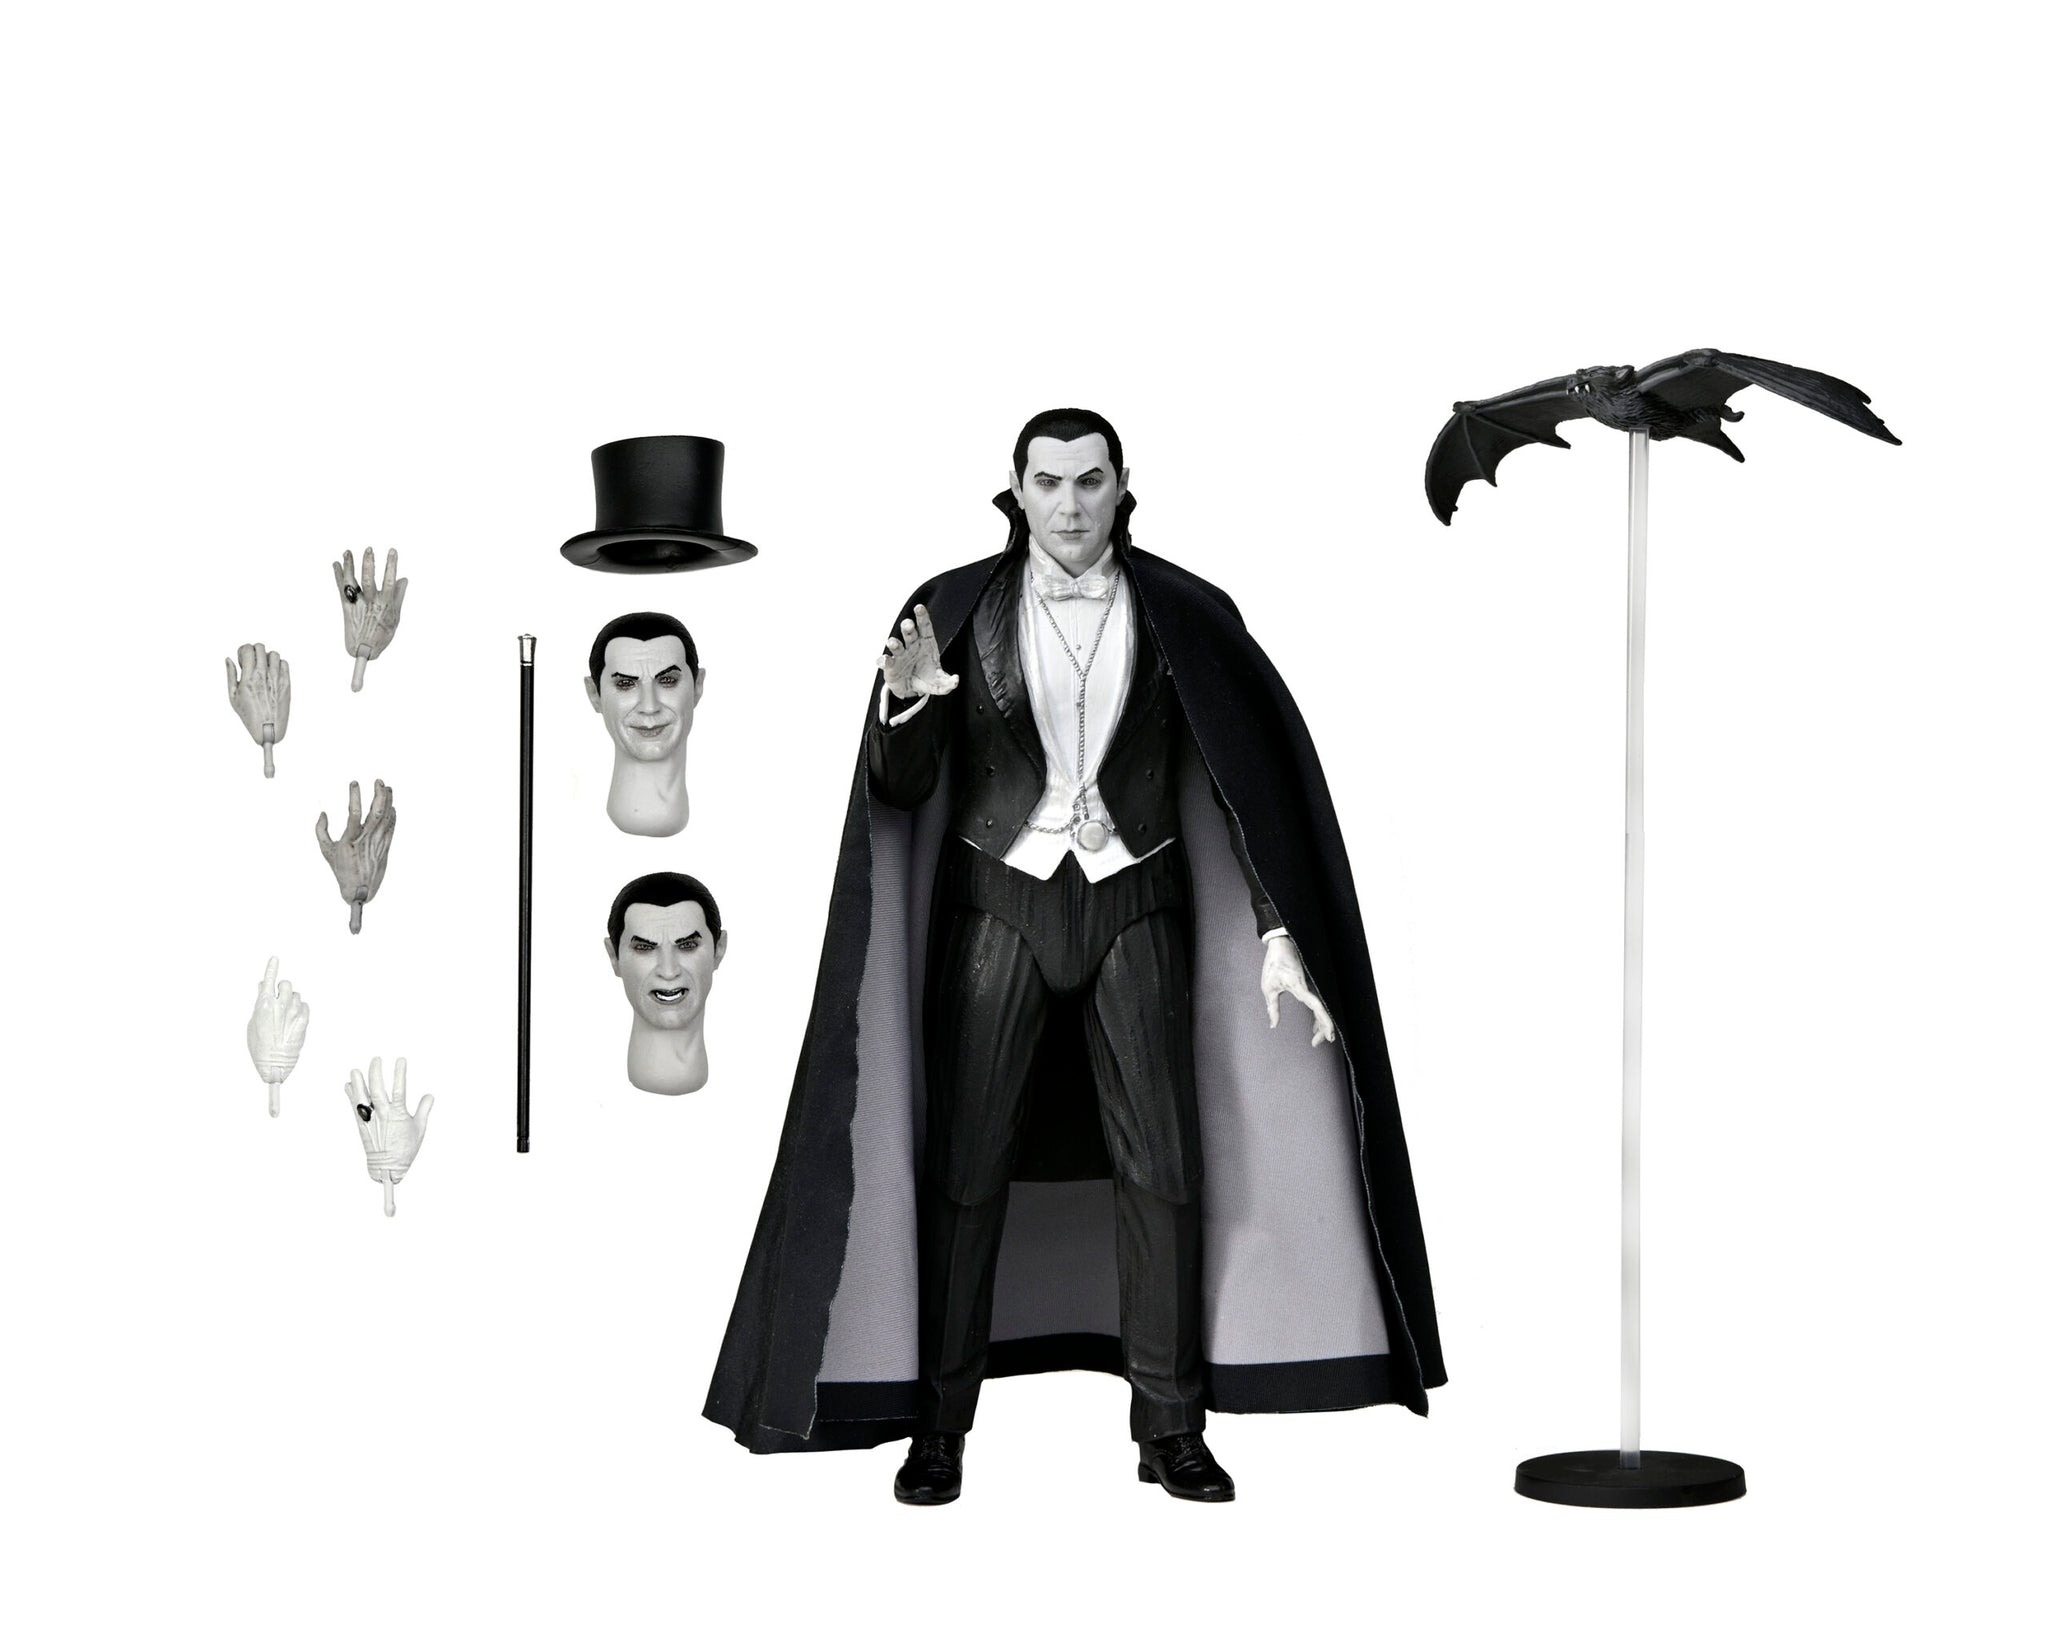 Universal Monsters 7” Scale Action Figure Ultimate Dracula (Carfax Abbey)